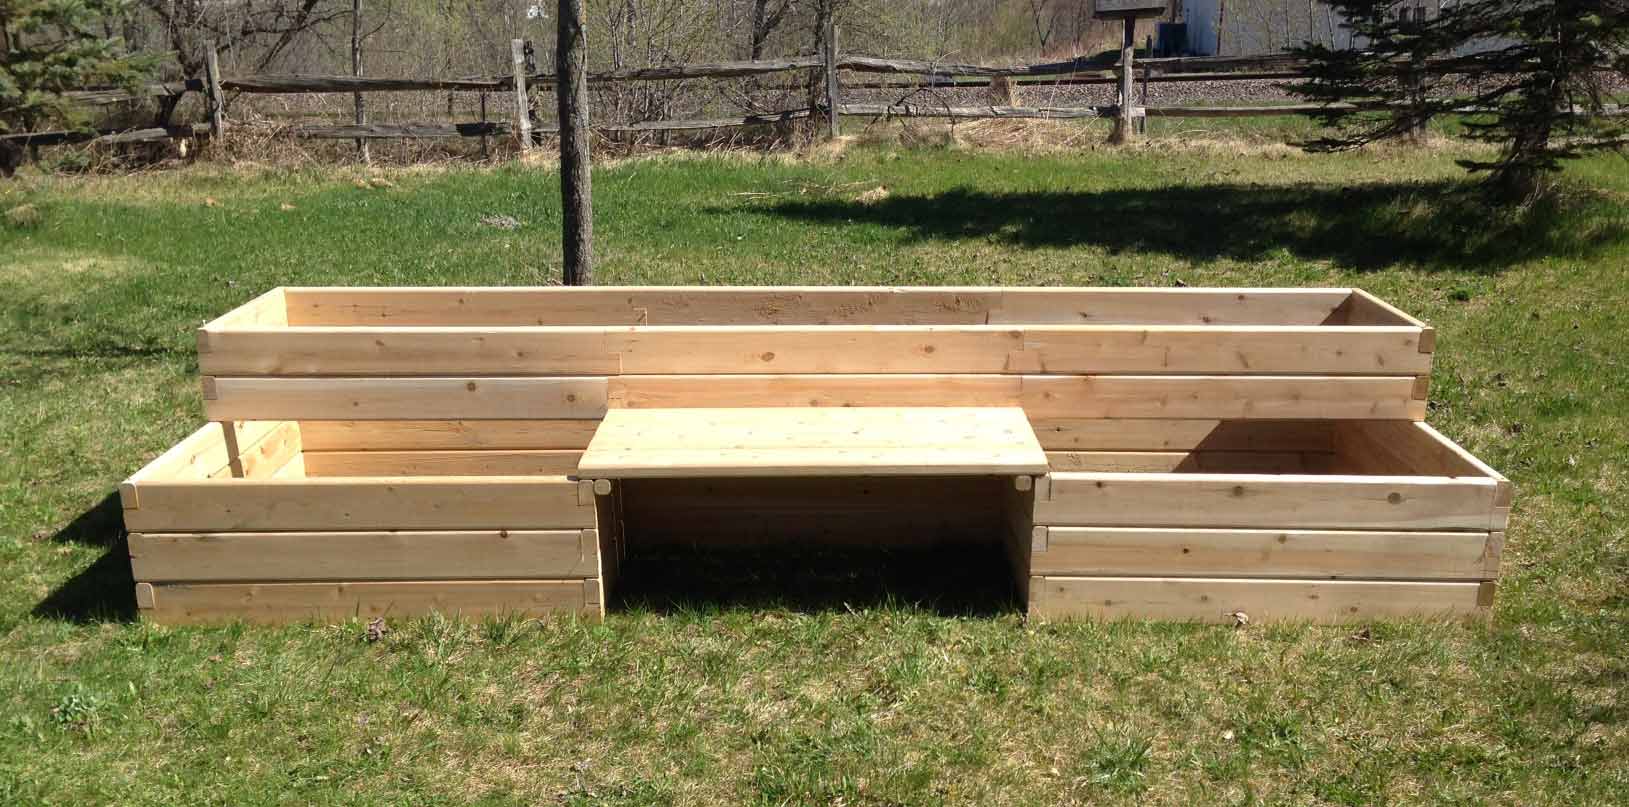 4 x 12 raised garden bed with bench